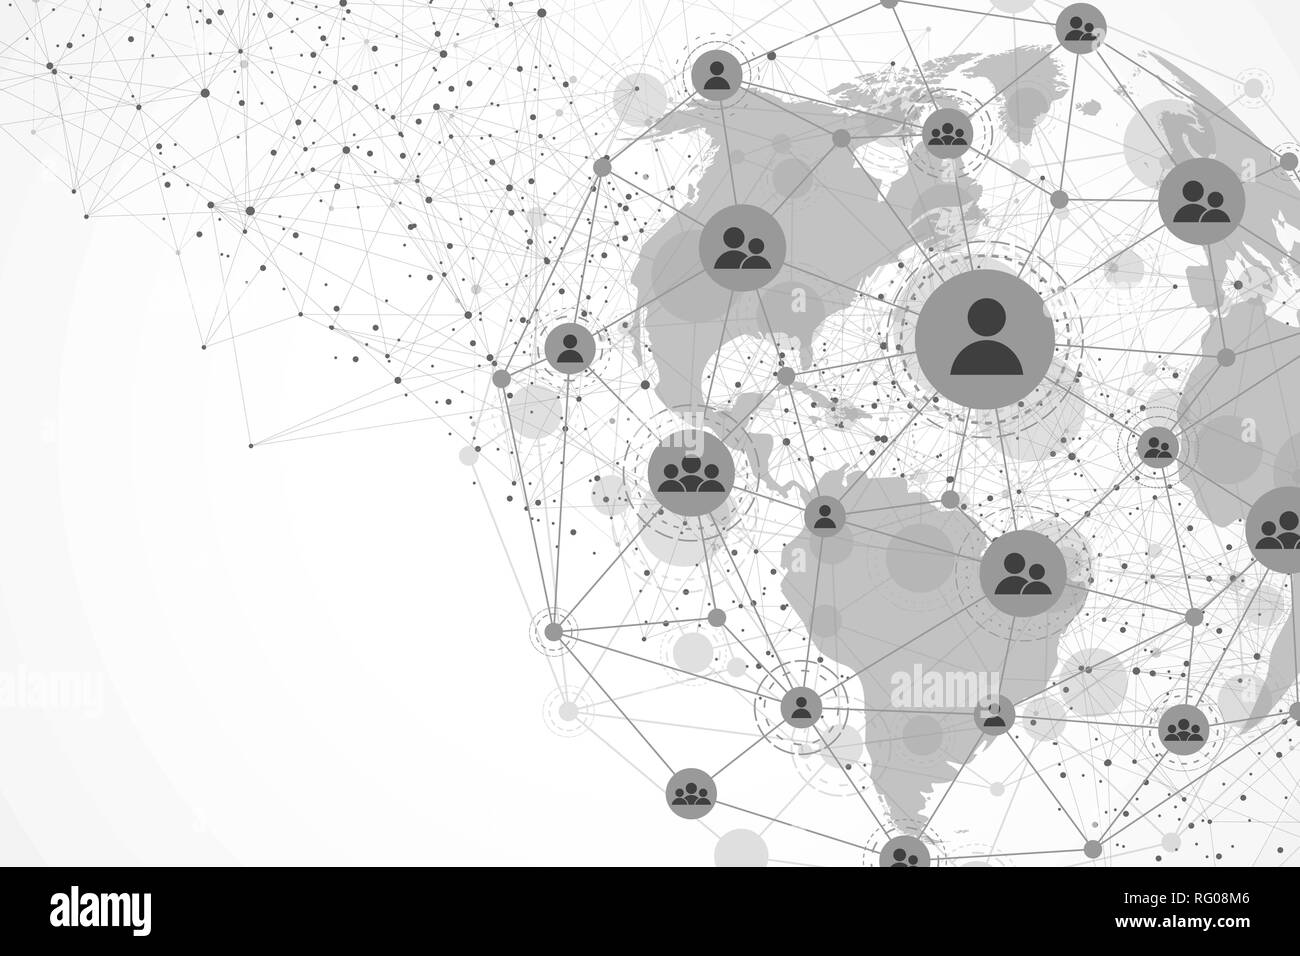 Global structure networking and data connection concept. Social network communication in the global computer networks. Internet technology. Business Stock Vector